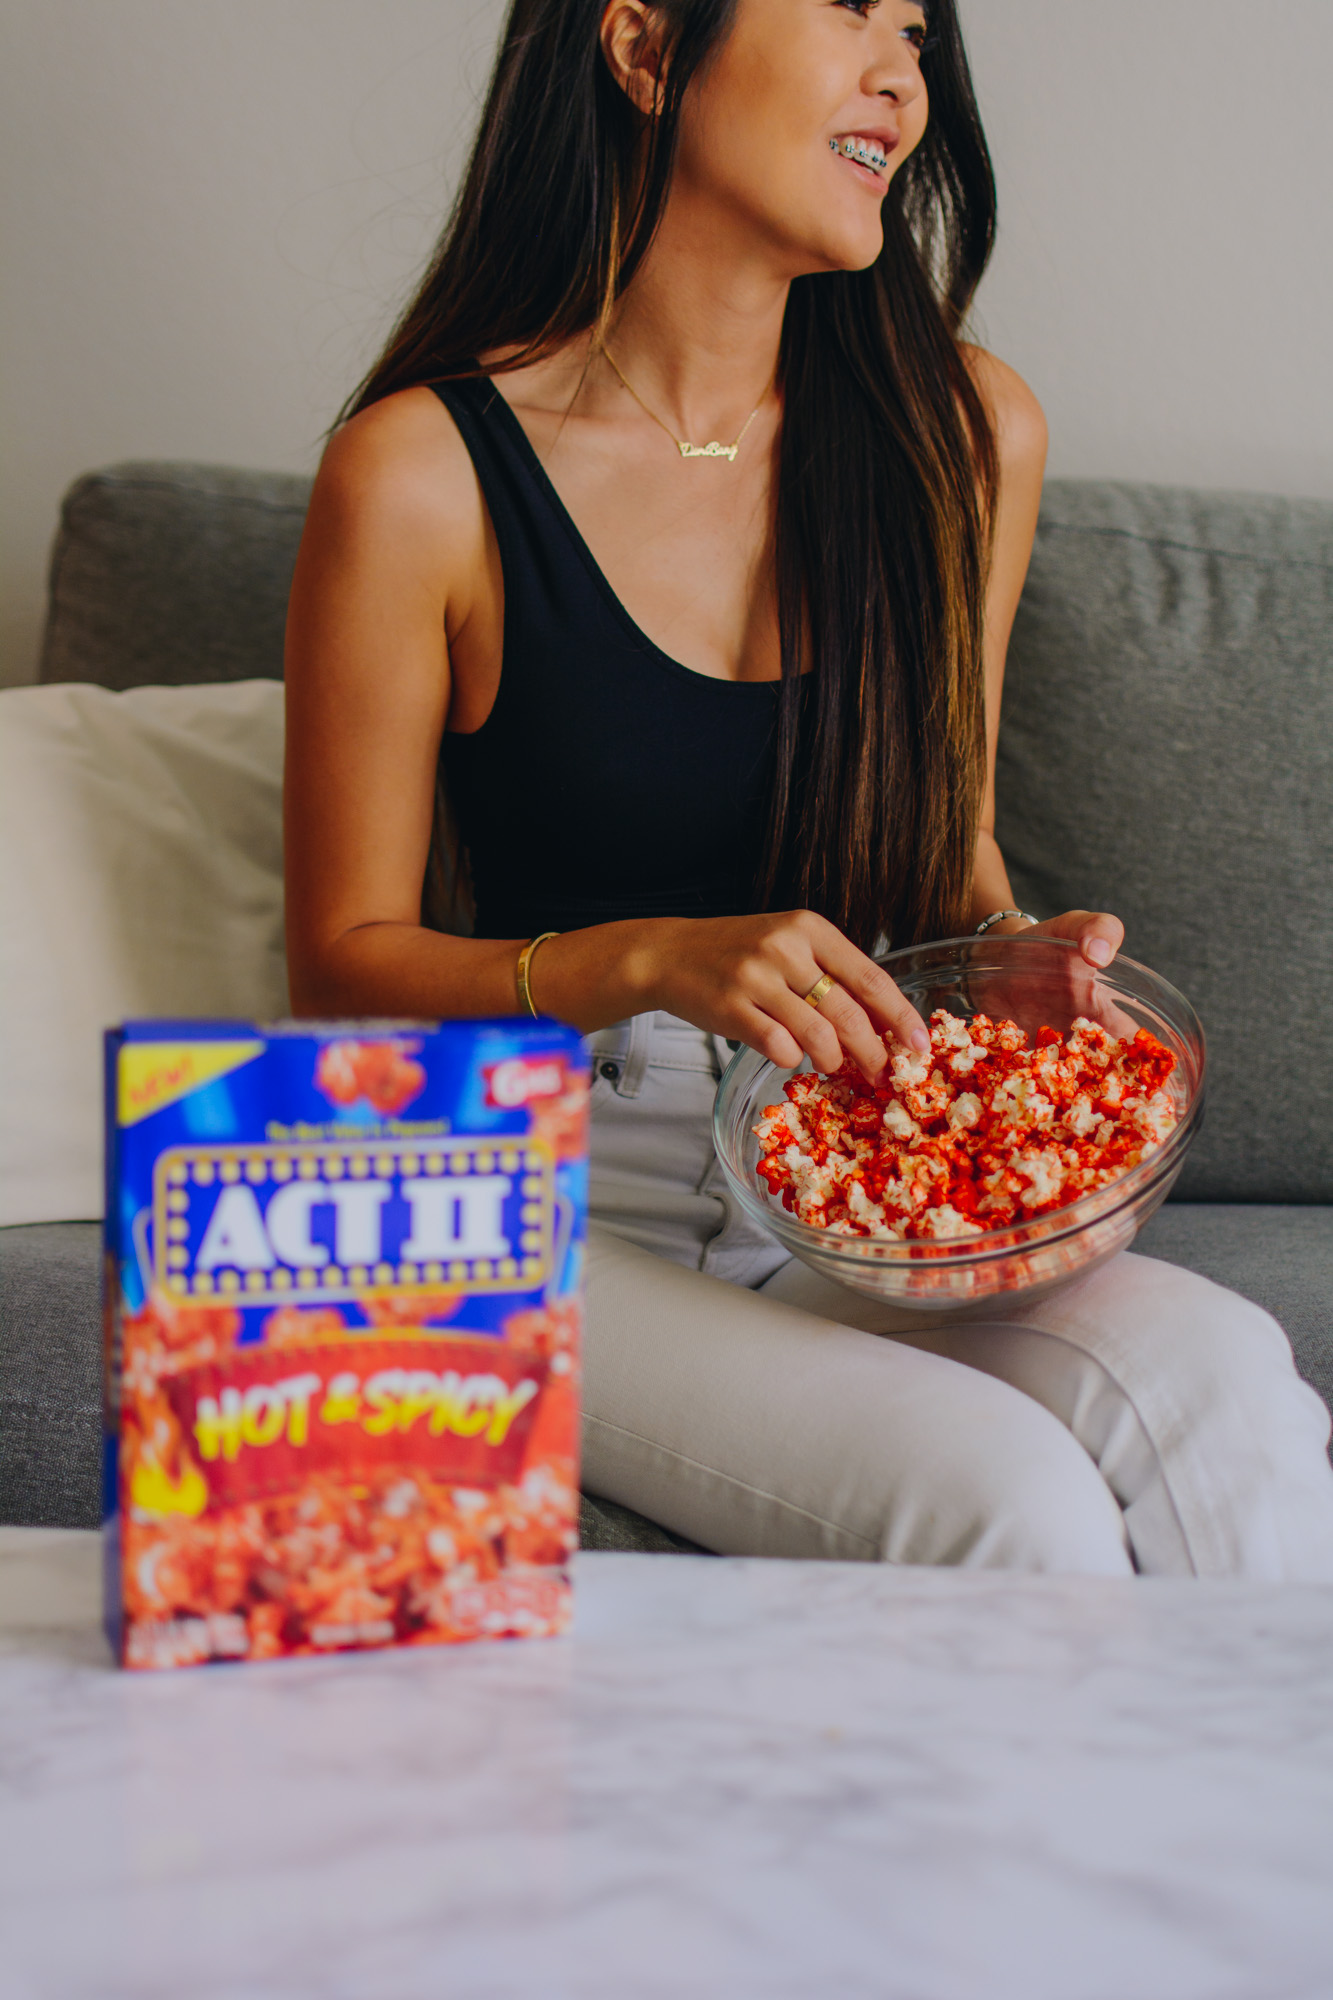 Arizona blogger Demi Bang talks about kicking things up a notch with these ACT II Hot & Spicy Popcorn.